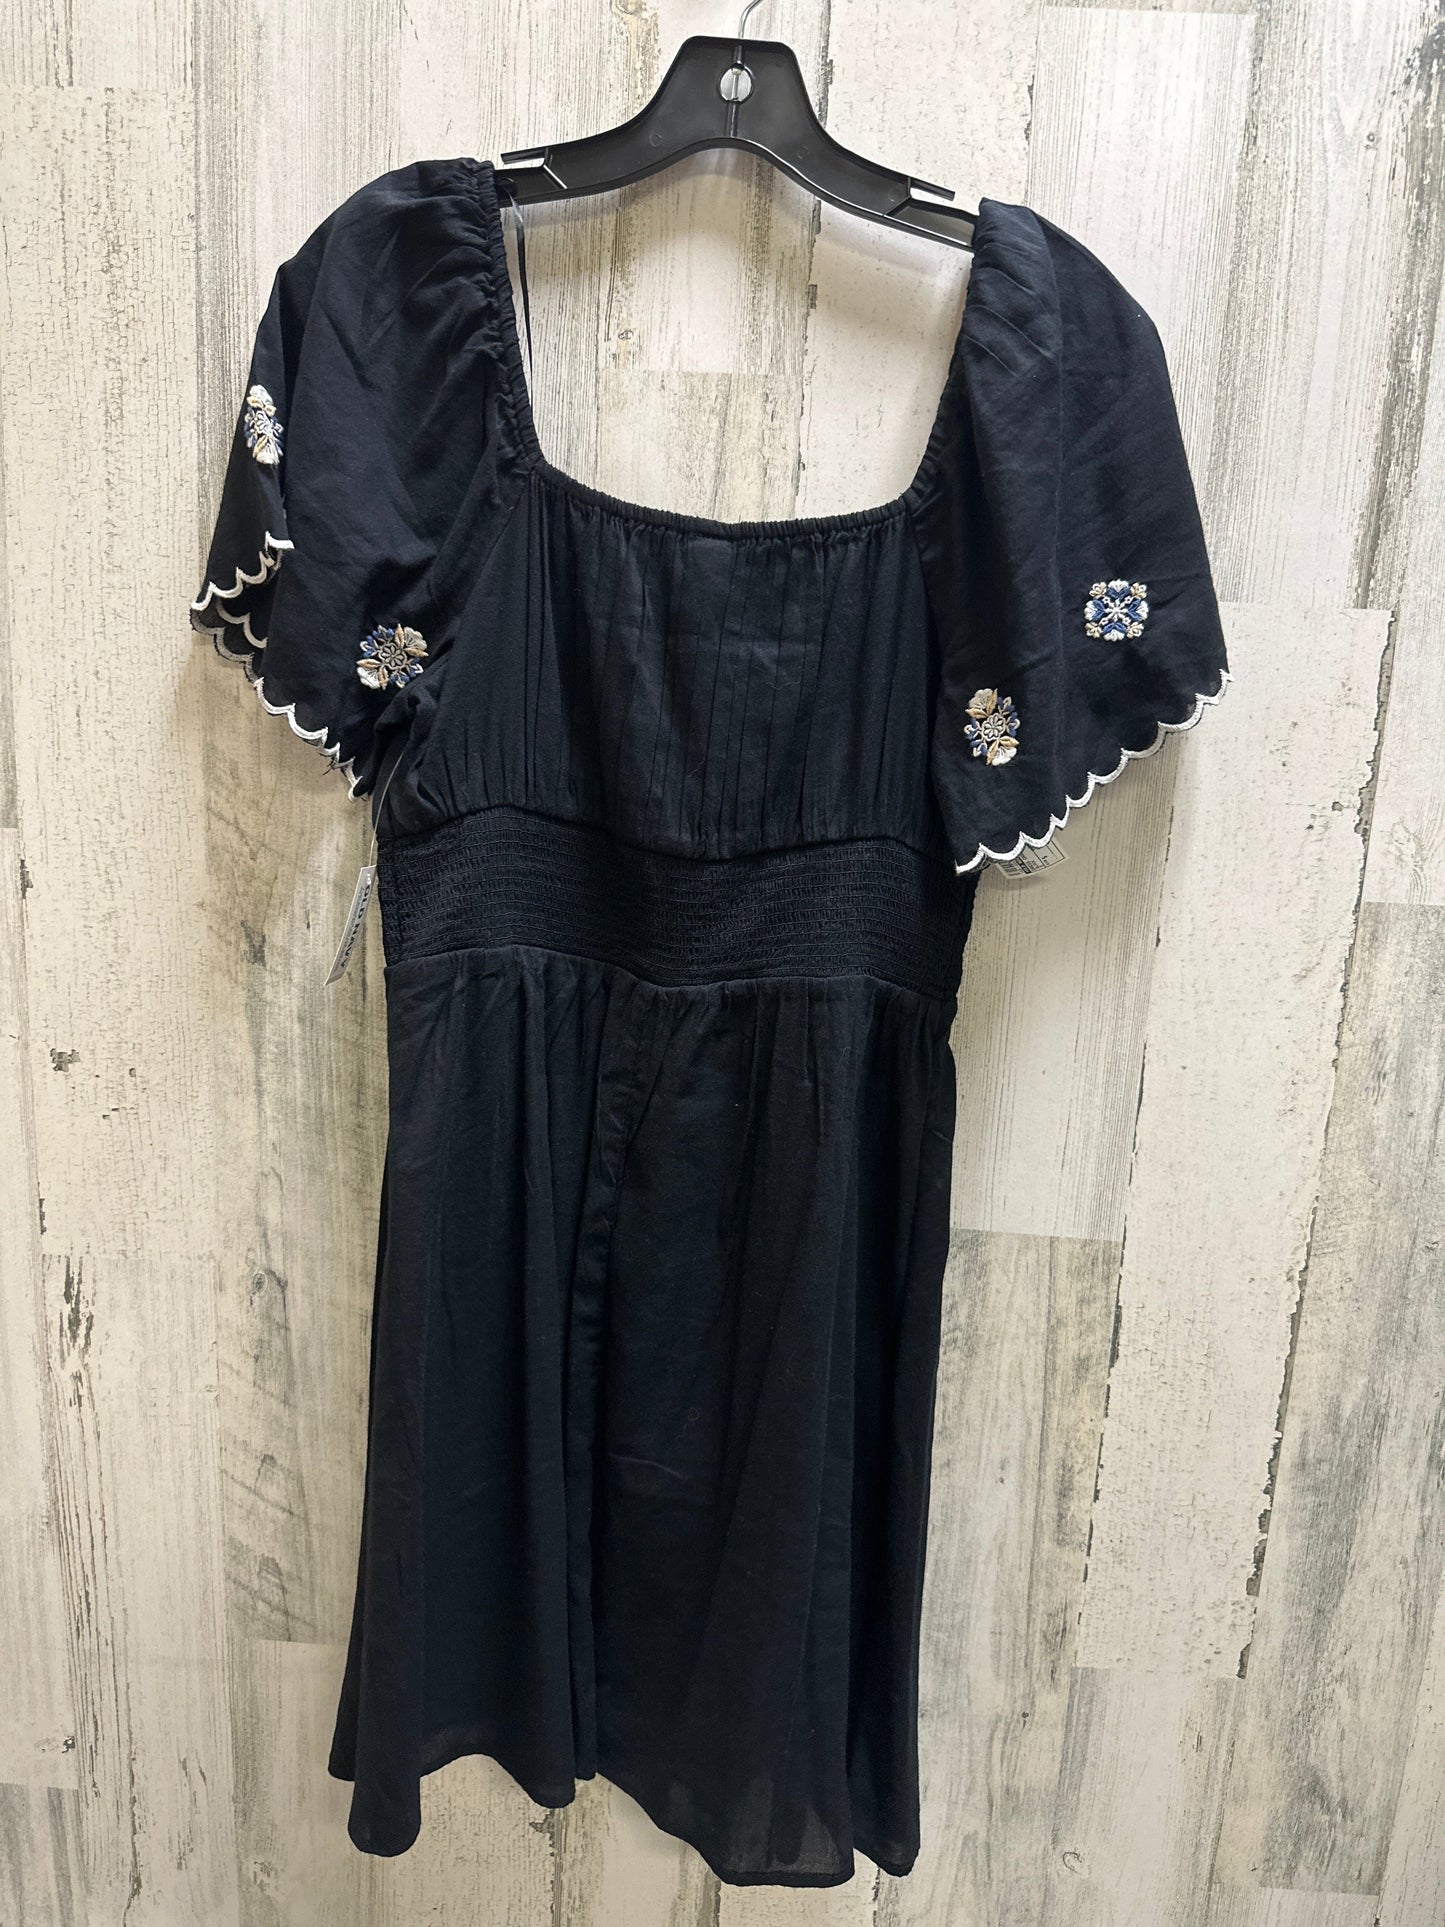 Black Dress Casual Short Old Navy, Size S